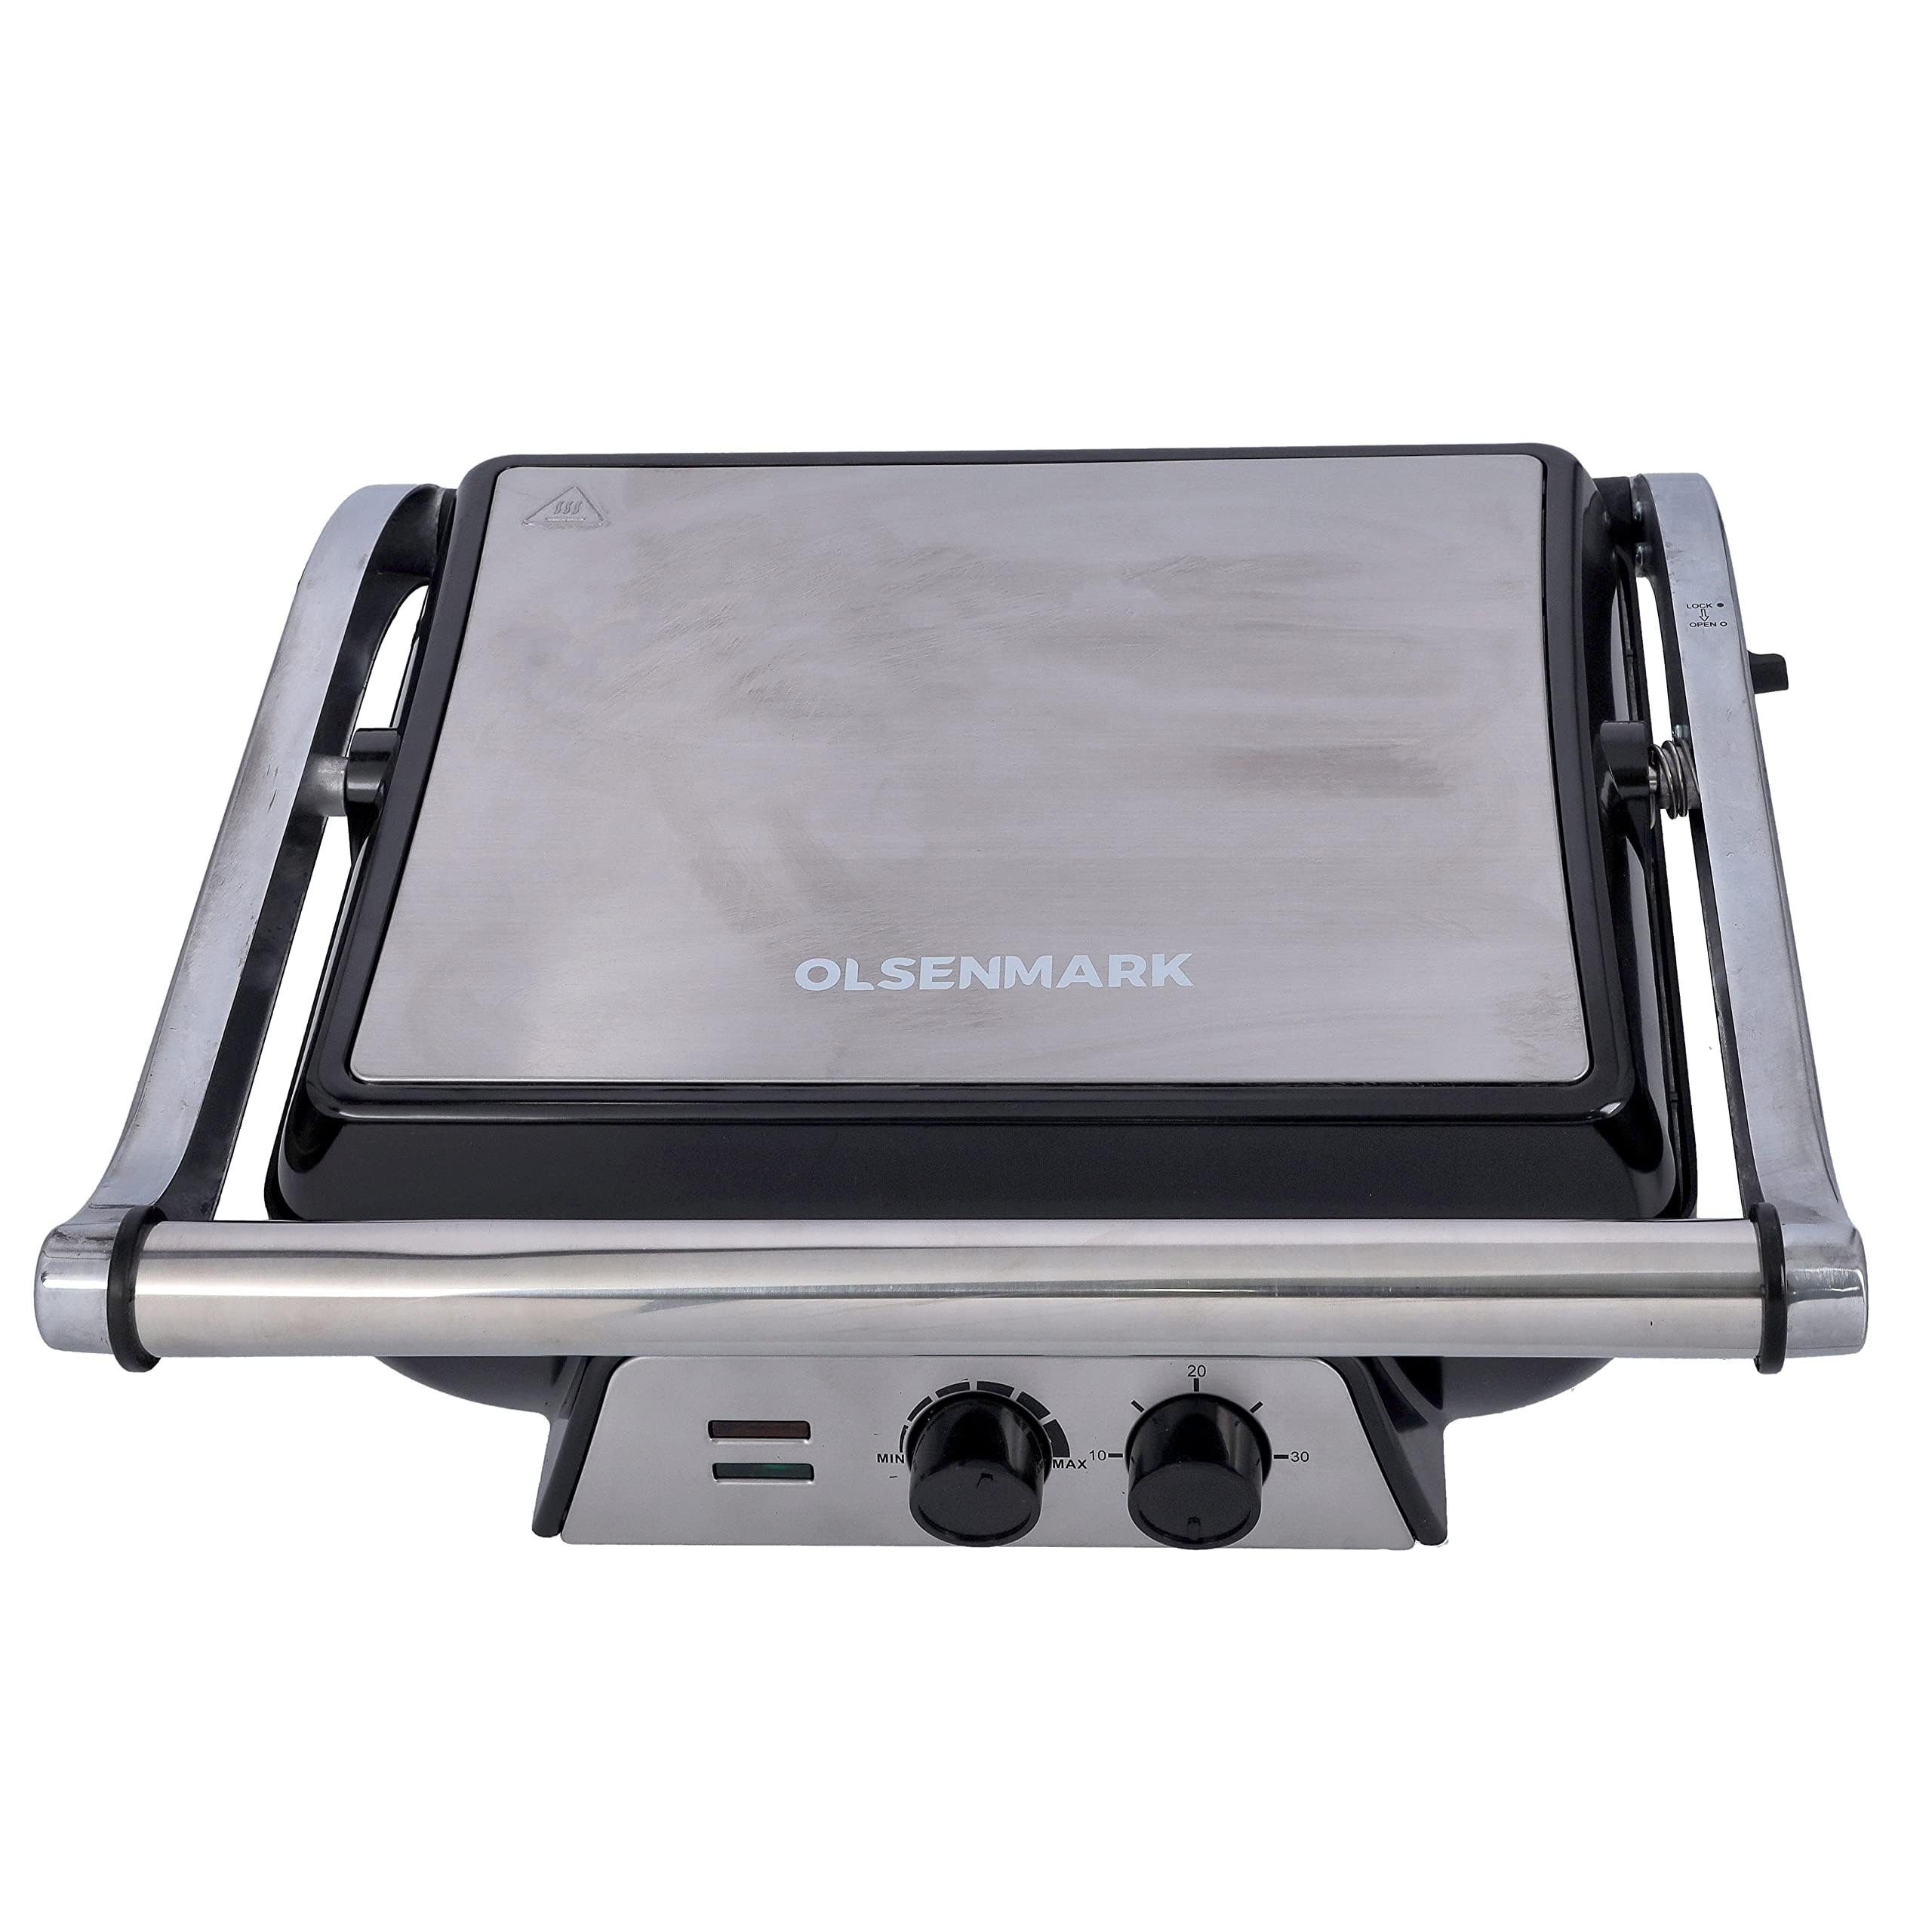 Olsenmark 2000W Super Jumbo Grill Sandwich Maker Opens 180 Degrees With Cool Touch Handle Adjustable Temperature & Timer With Indicator Light 2 Year Warranty, Multi Color, Omgm2441